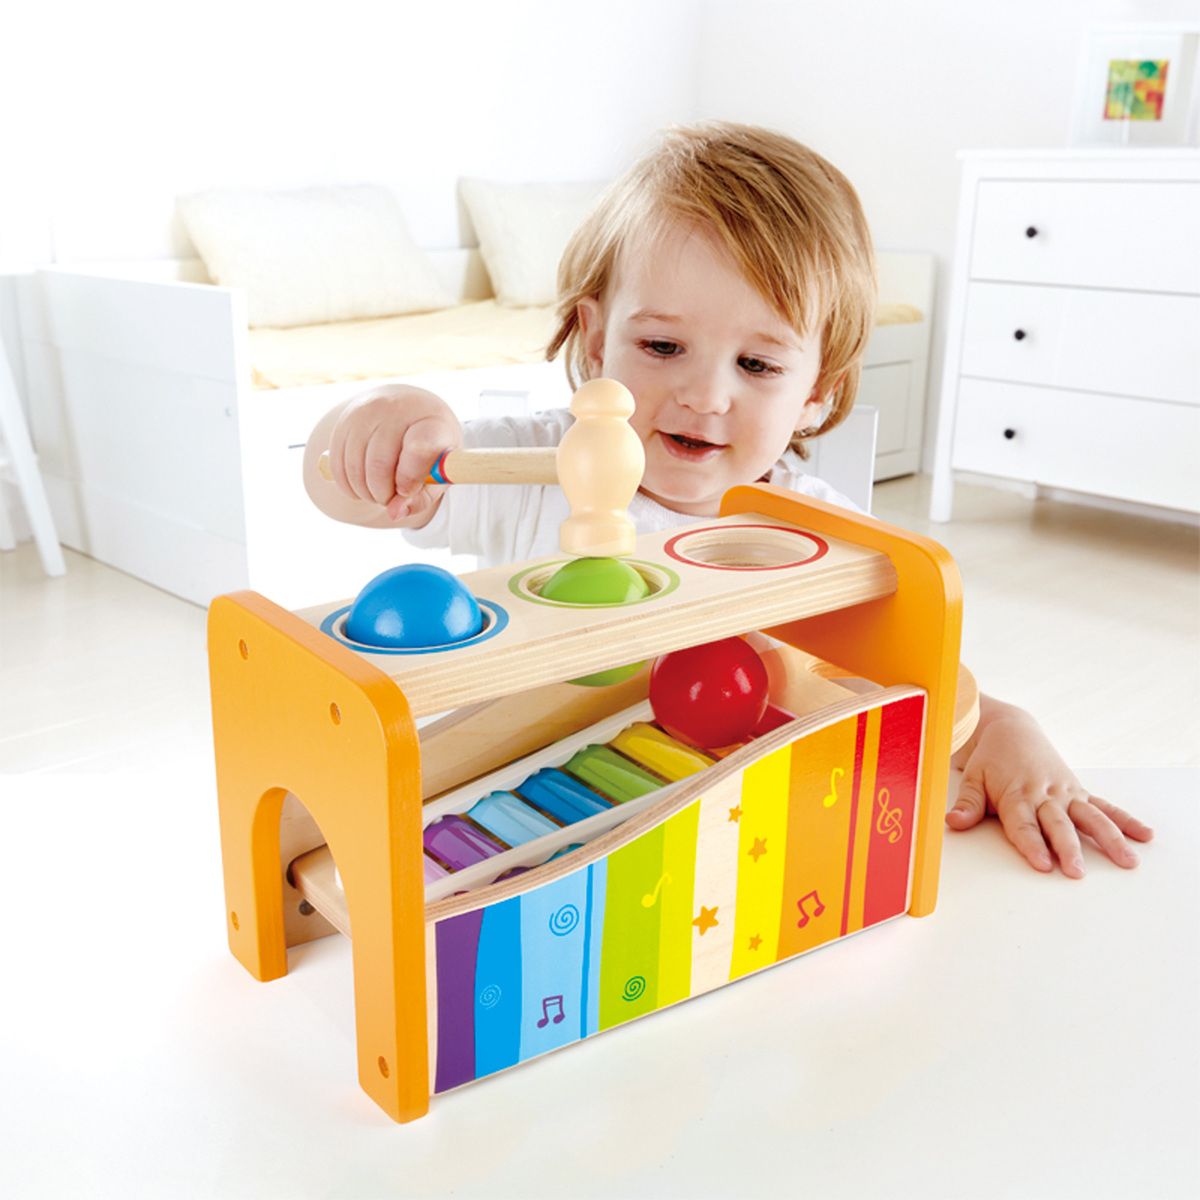 Hape Pound and Tap Bench Set for Kids, E0305